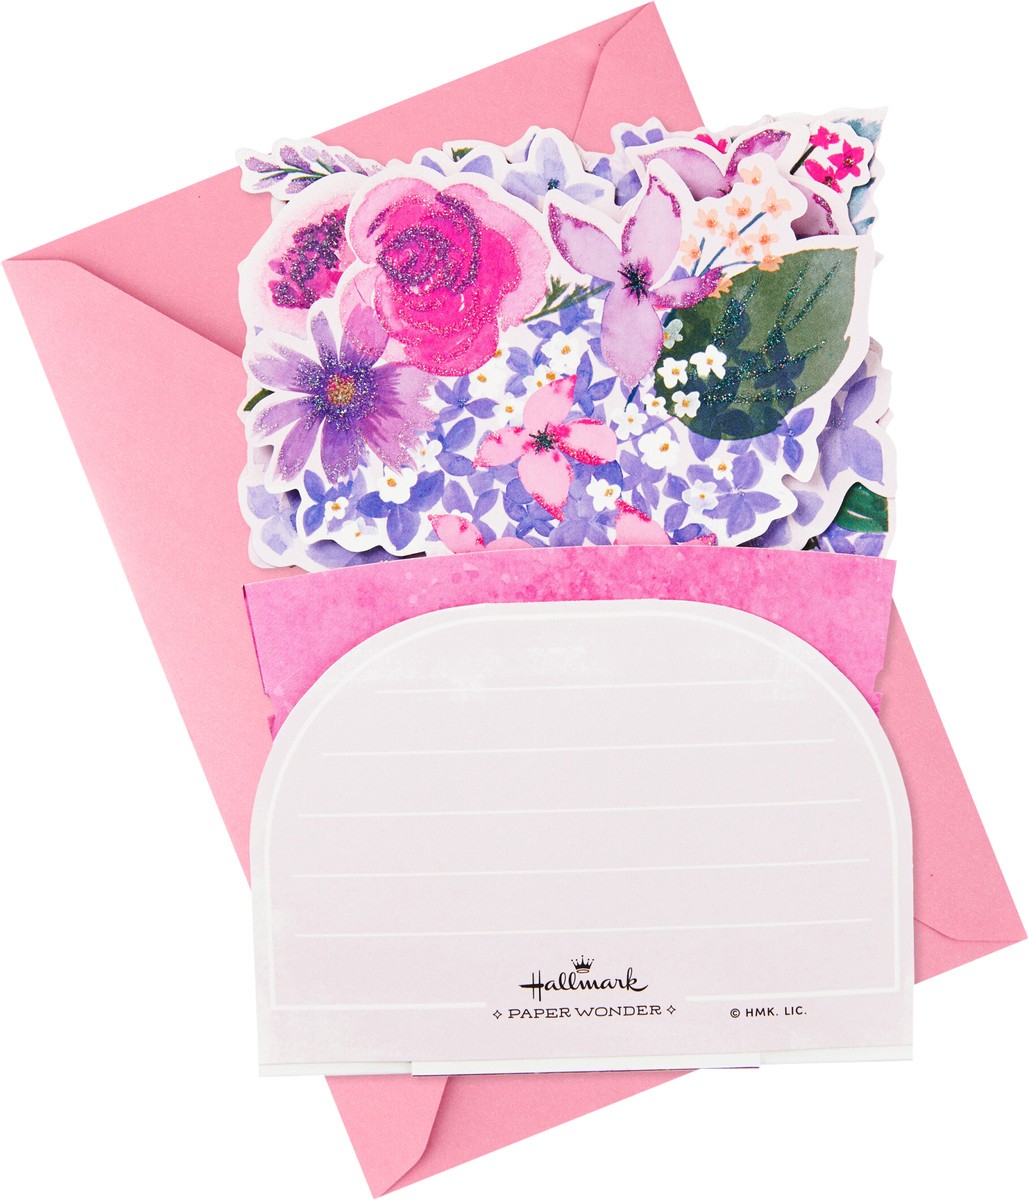 slide 7 of 7, Hallmark Paper Wonder Mothers Day Pop Up Card (Purple Flower Bouquet, Beautiful in Every Way), 1 ct